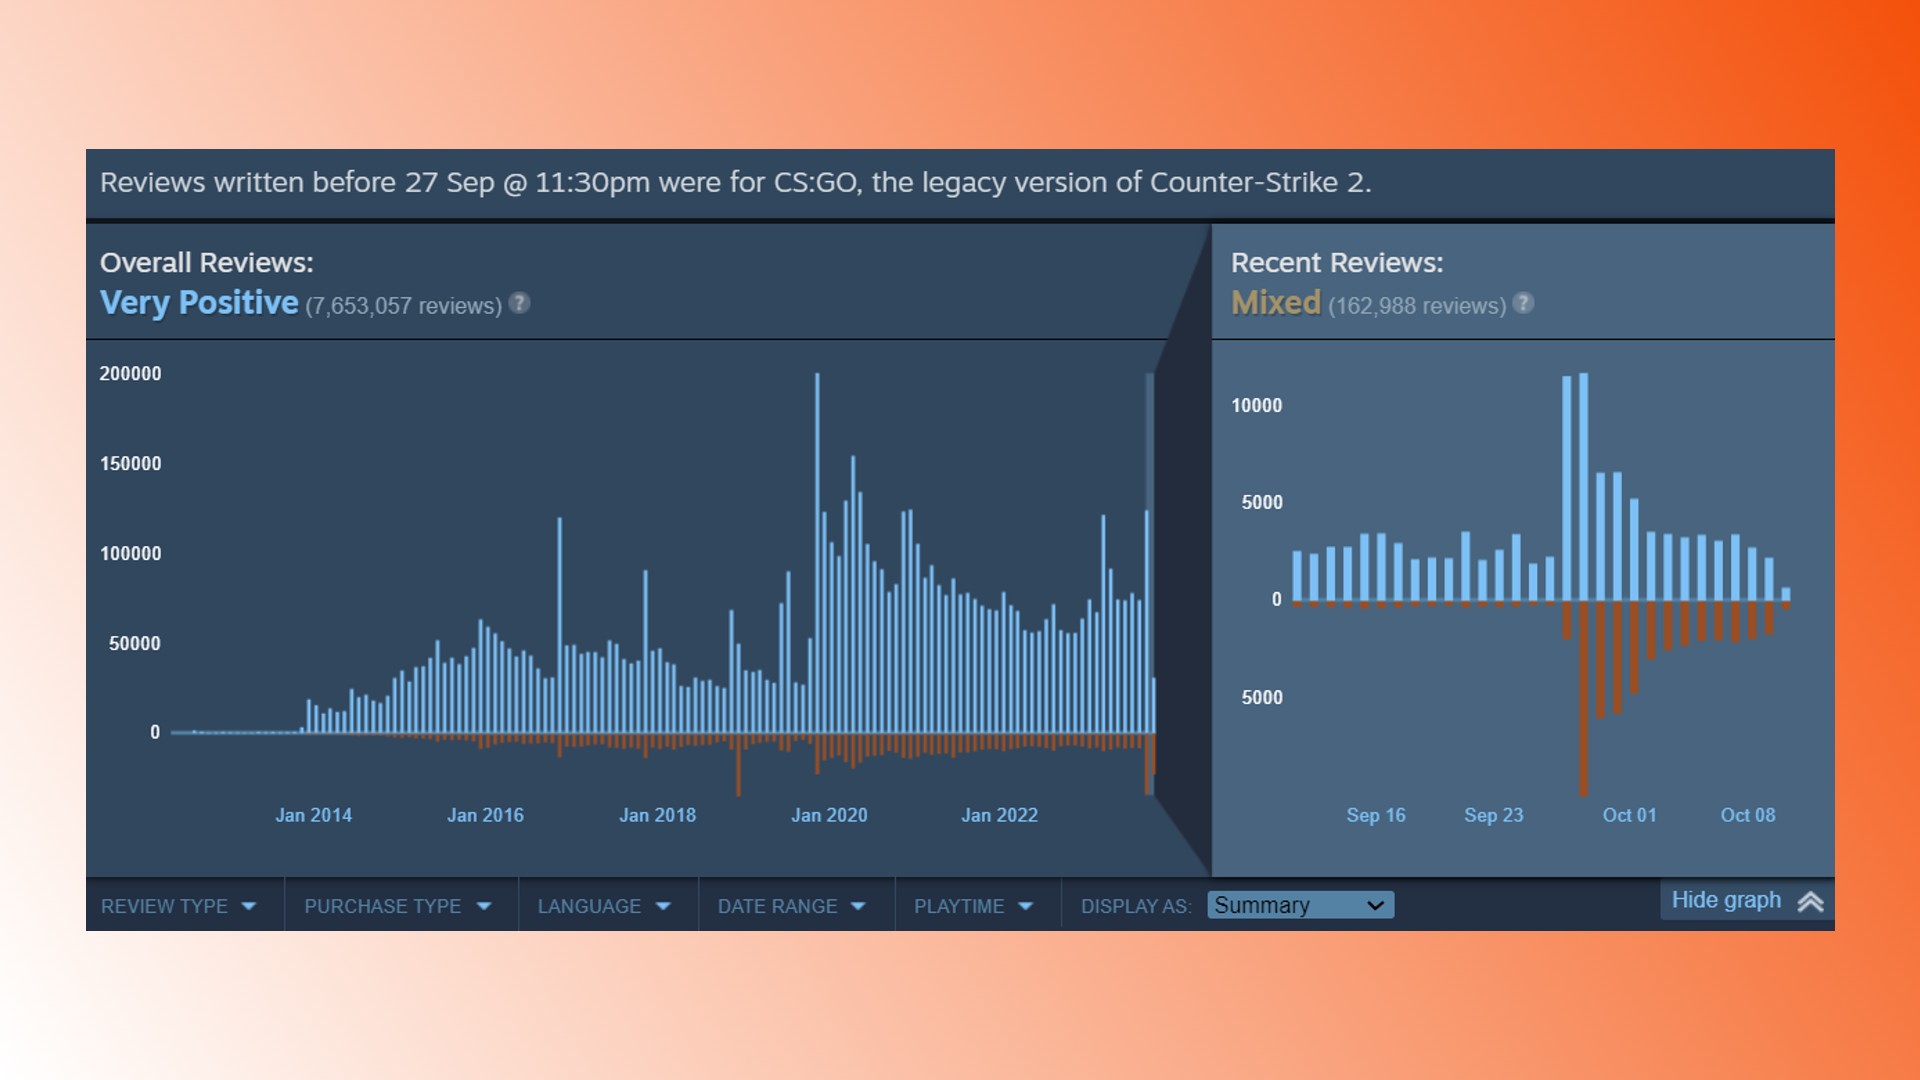 Steam Accidentally Removed Games, Including CS: GO and DOTA 2